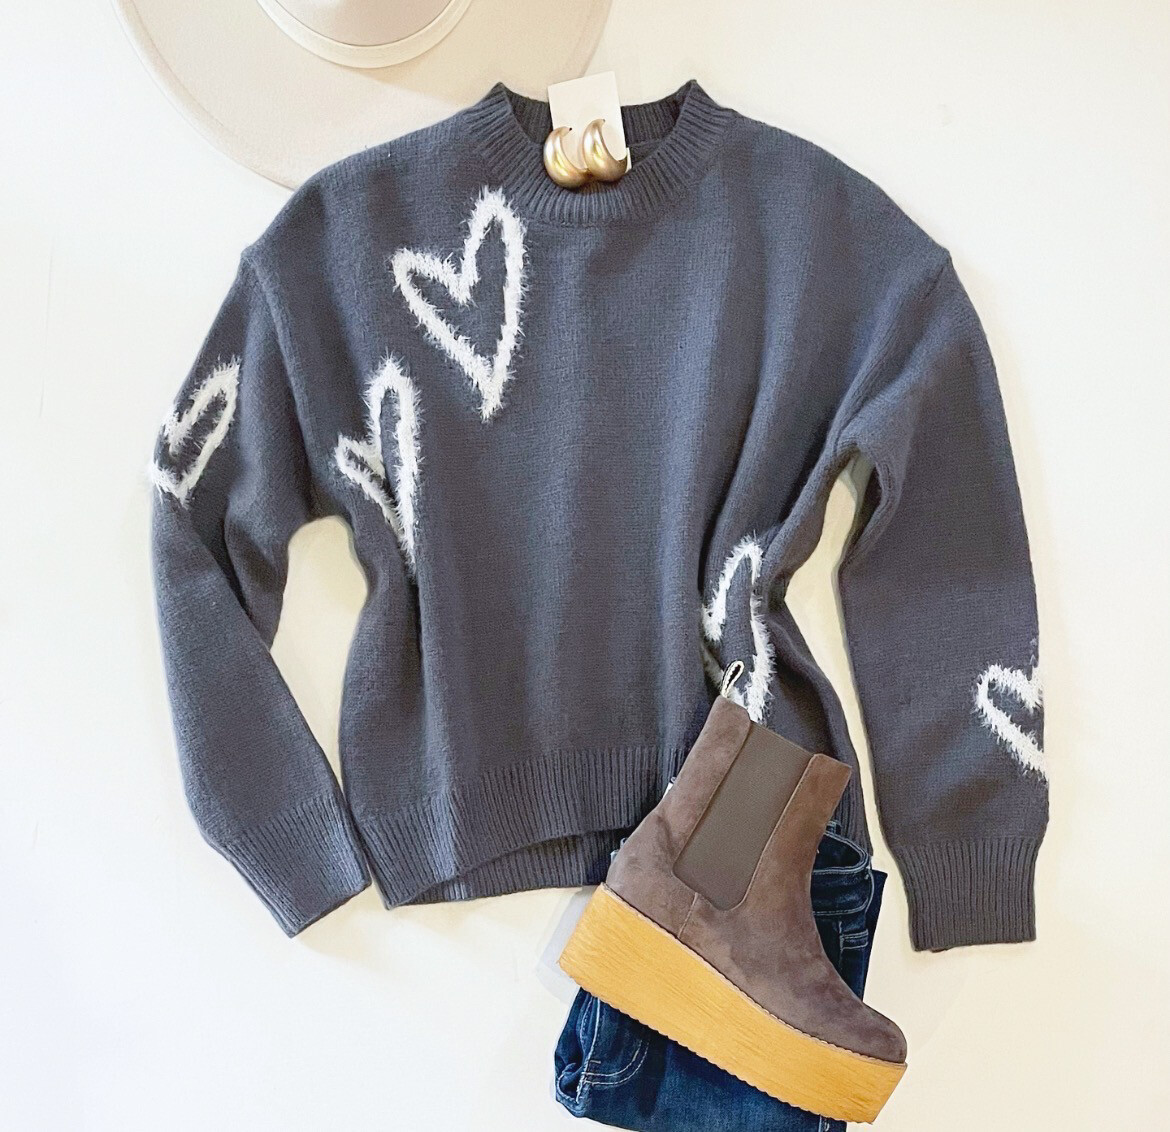 Warm And Fuzzy Heart Sweater